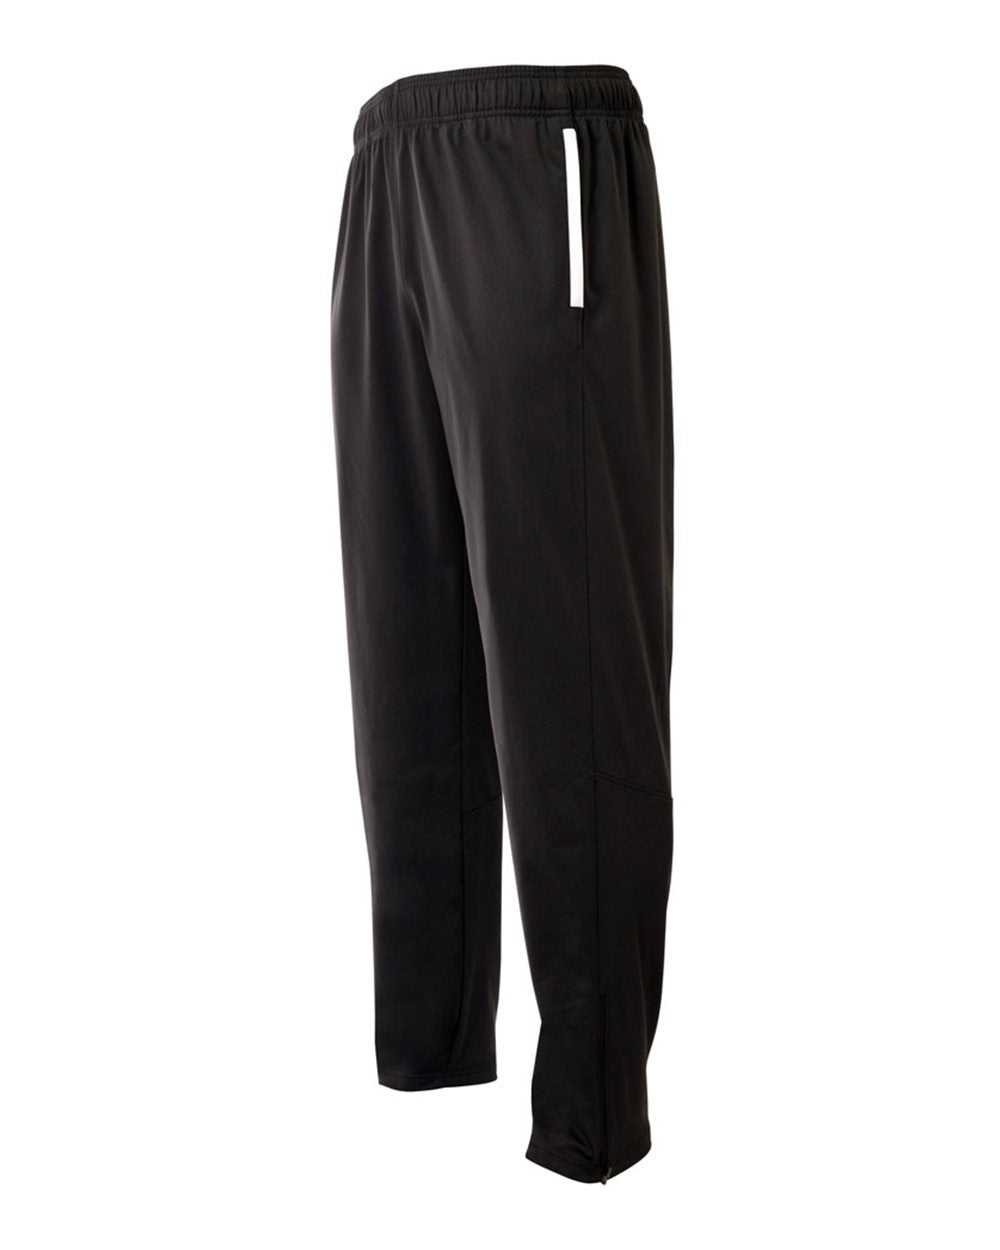 A4 NB6199 League Youth Warm Up Pant - Black White - HIT a Double